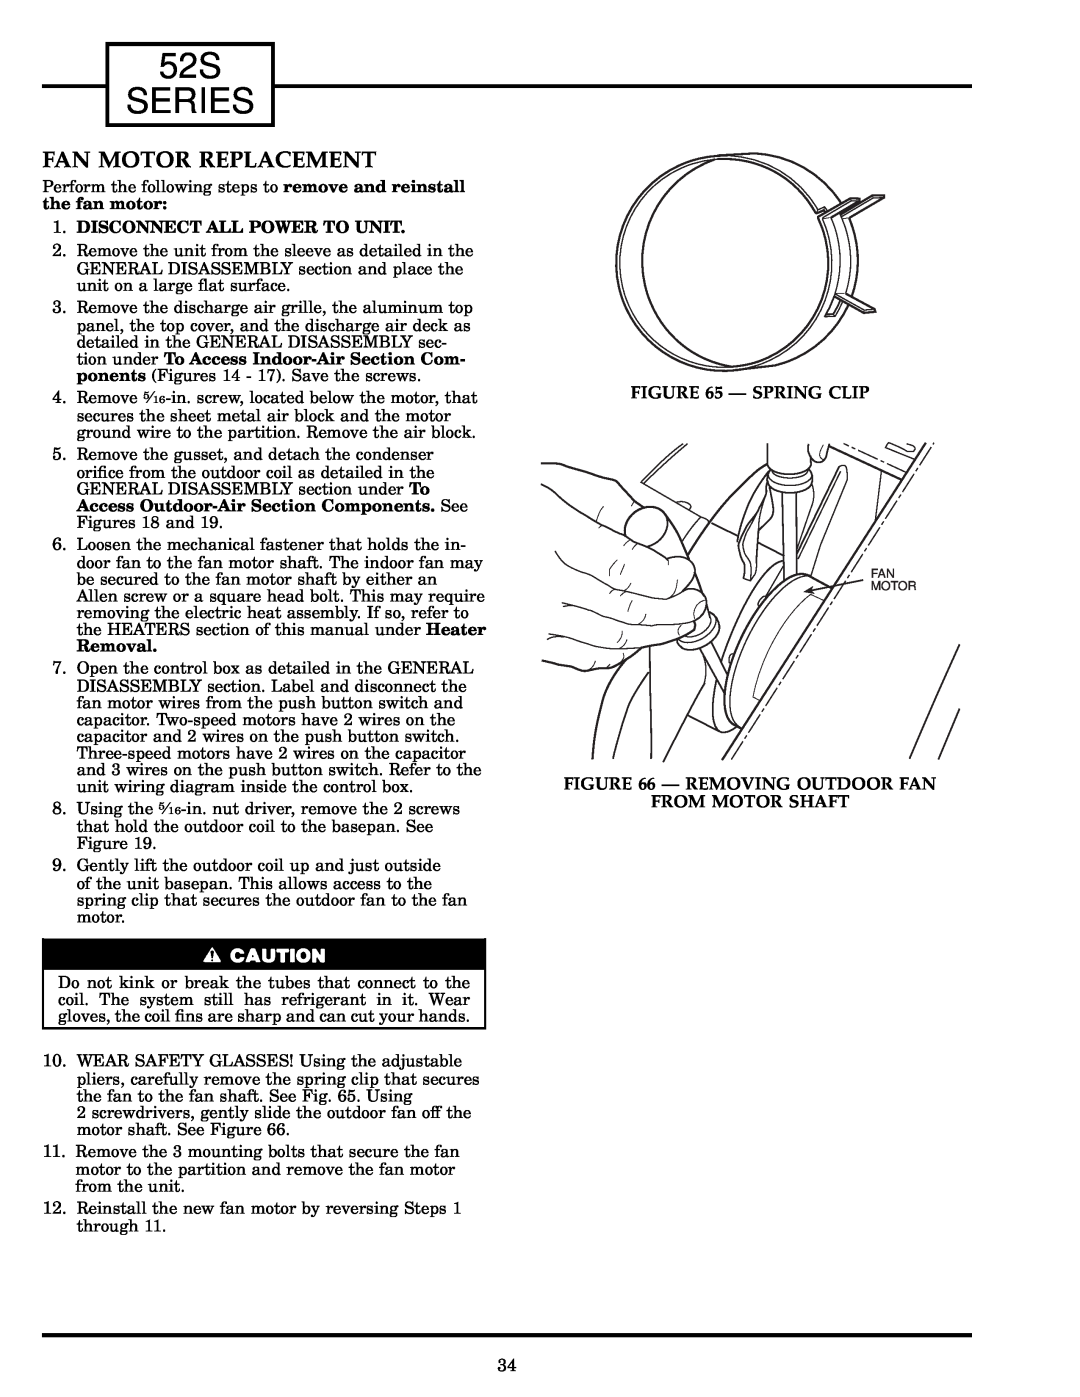 Carrier manual Fan Motor Replacement, Removal, Ð Spring Clip, Ð Removing Outdoor Fan From Motor Shaft, 52S SERIES 